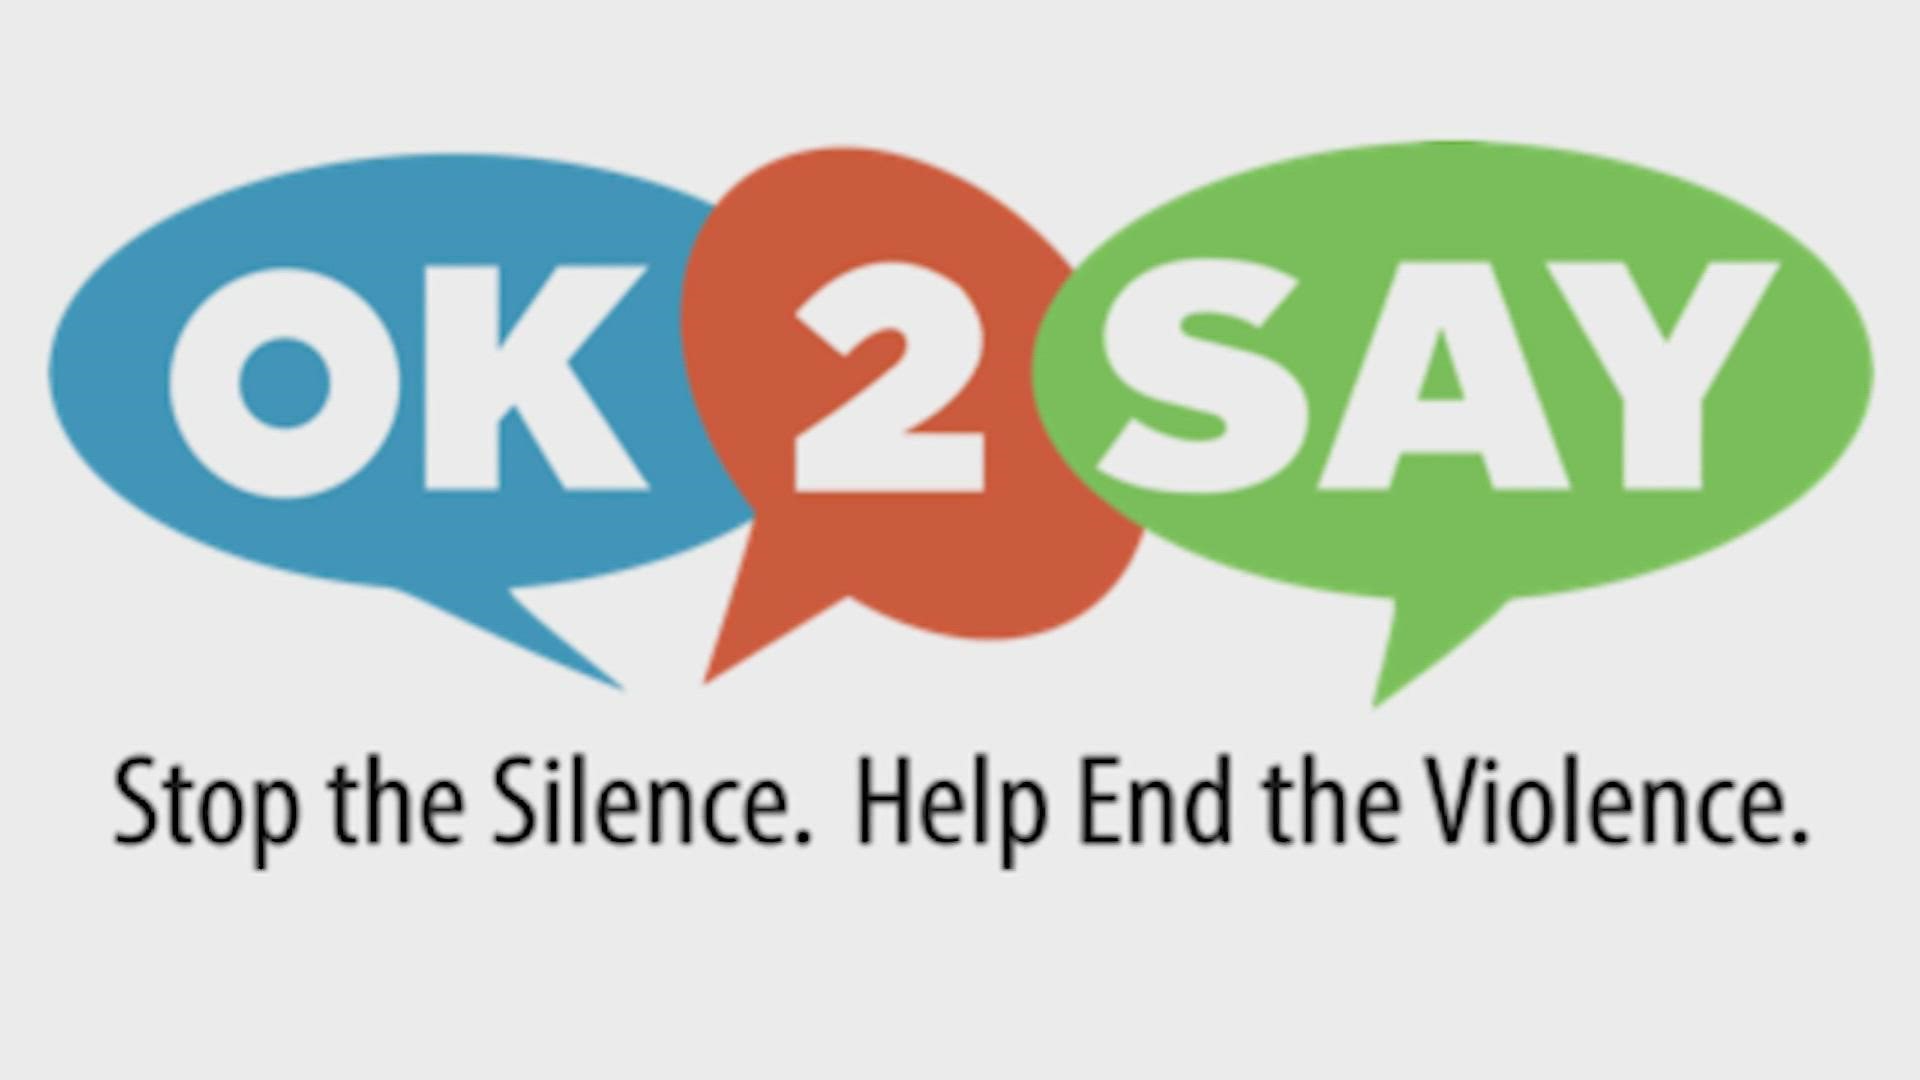 MSP created 'OK-2-SAY' in 2014. It's an online confidential tip line.